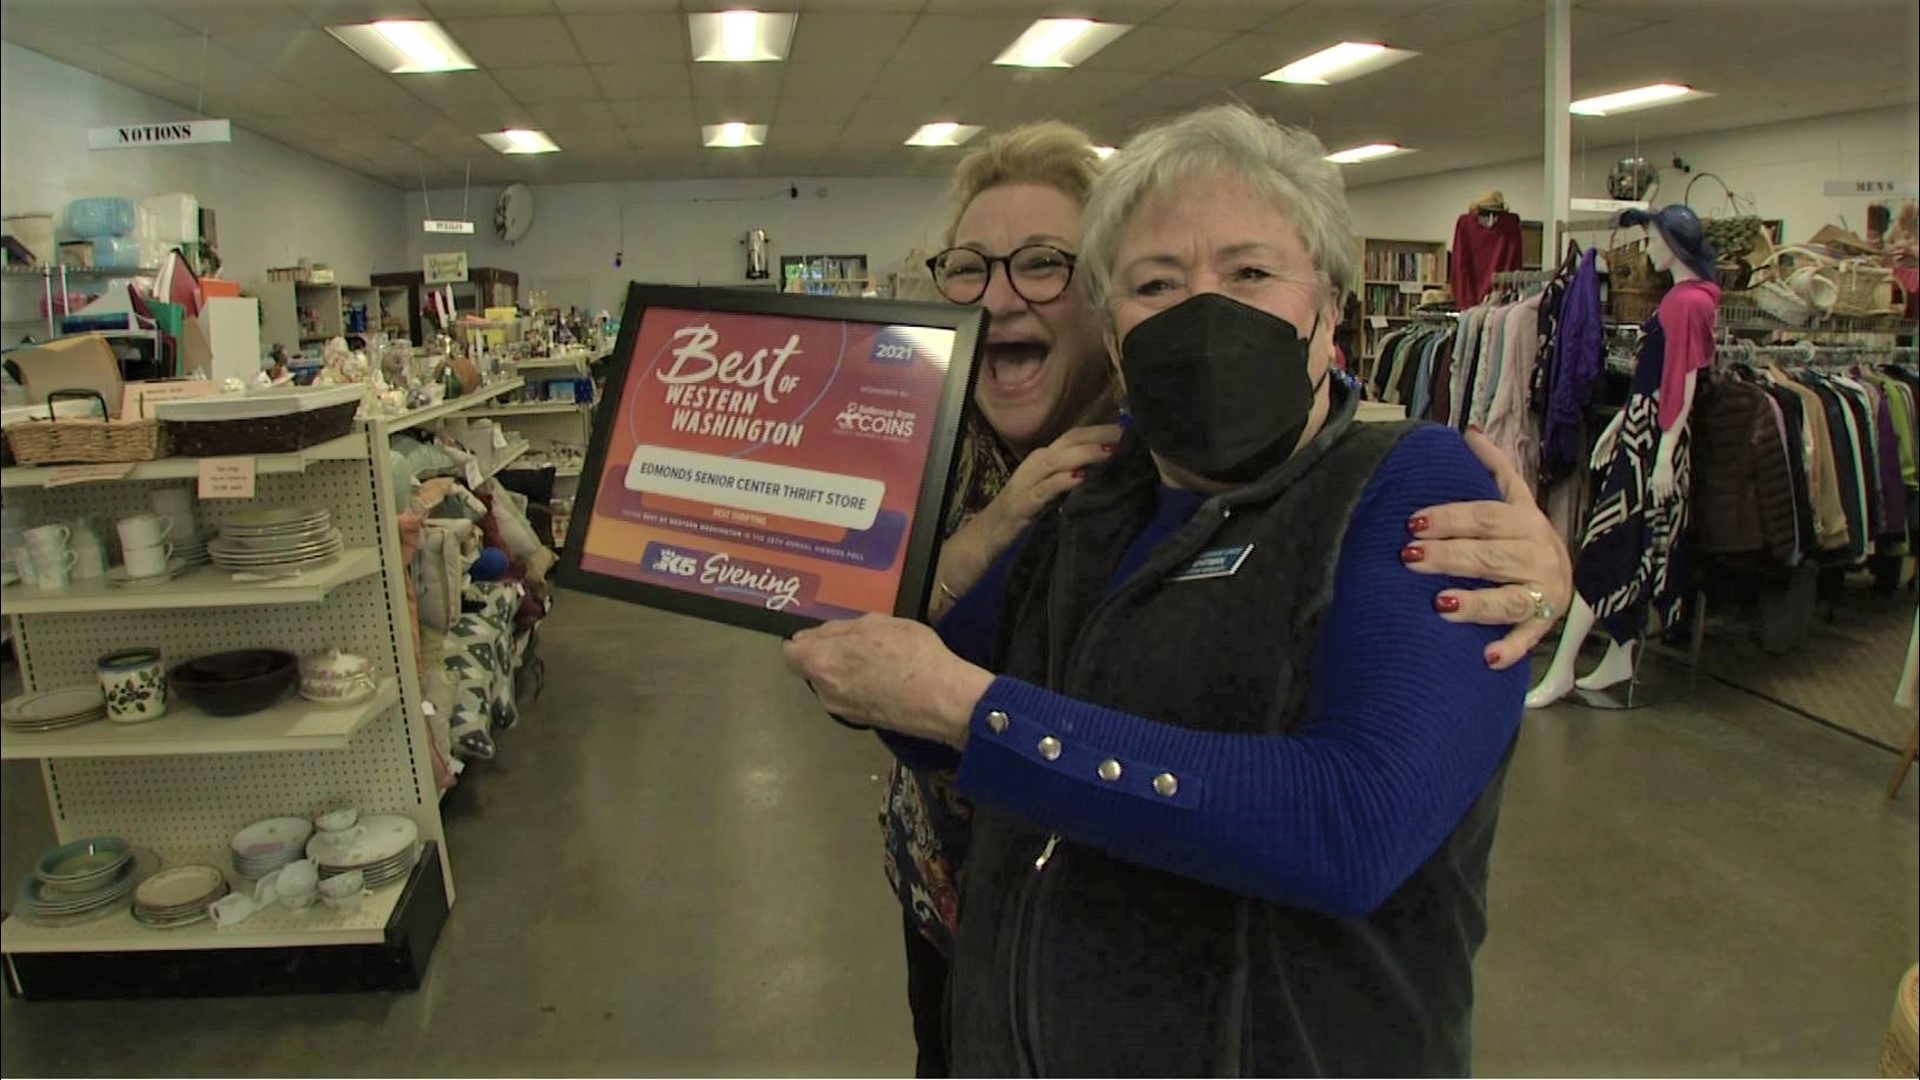 The Edmonds Senior Center Thrift Store has become a habit for savvy bargain hunters. #k5evening